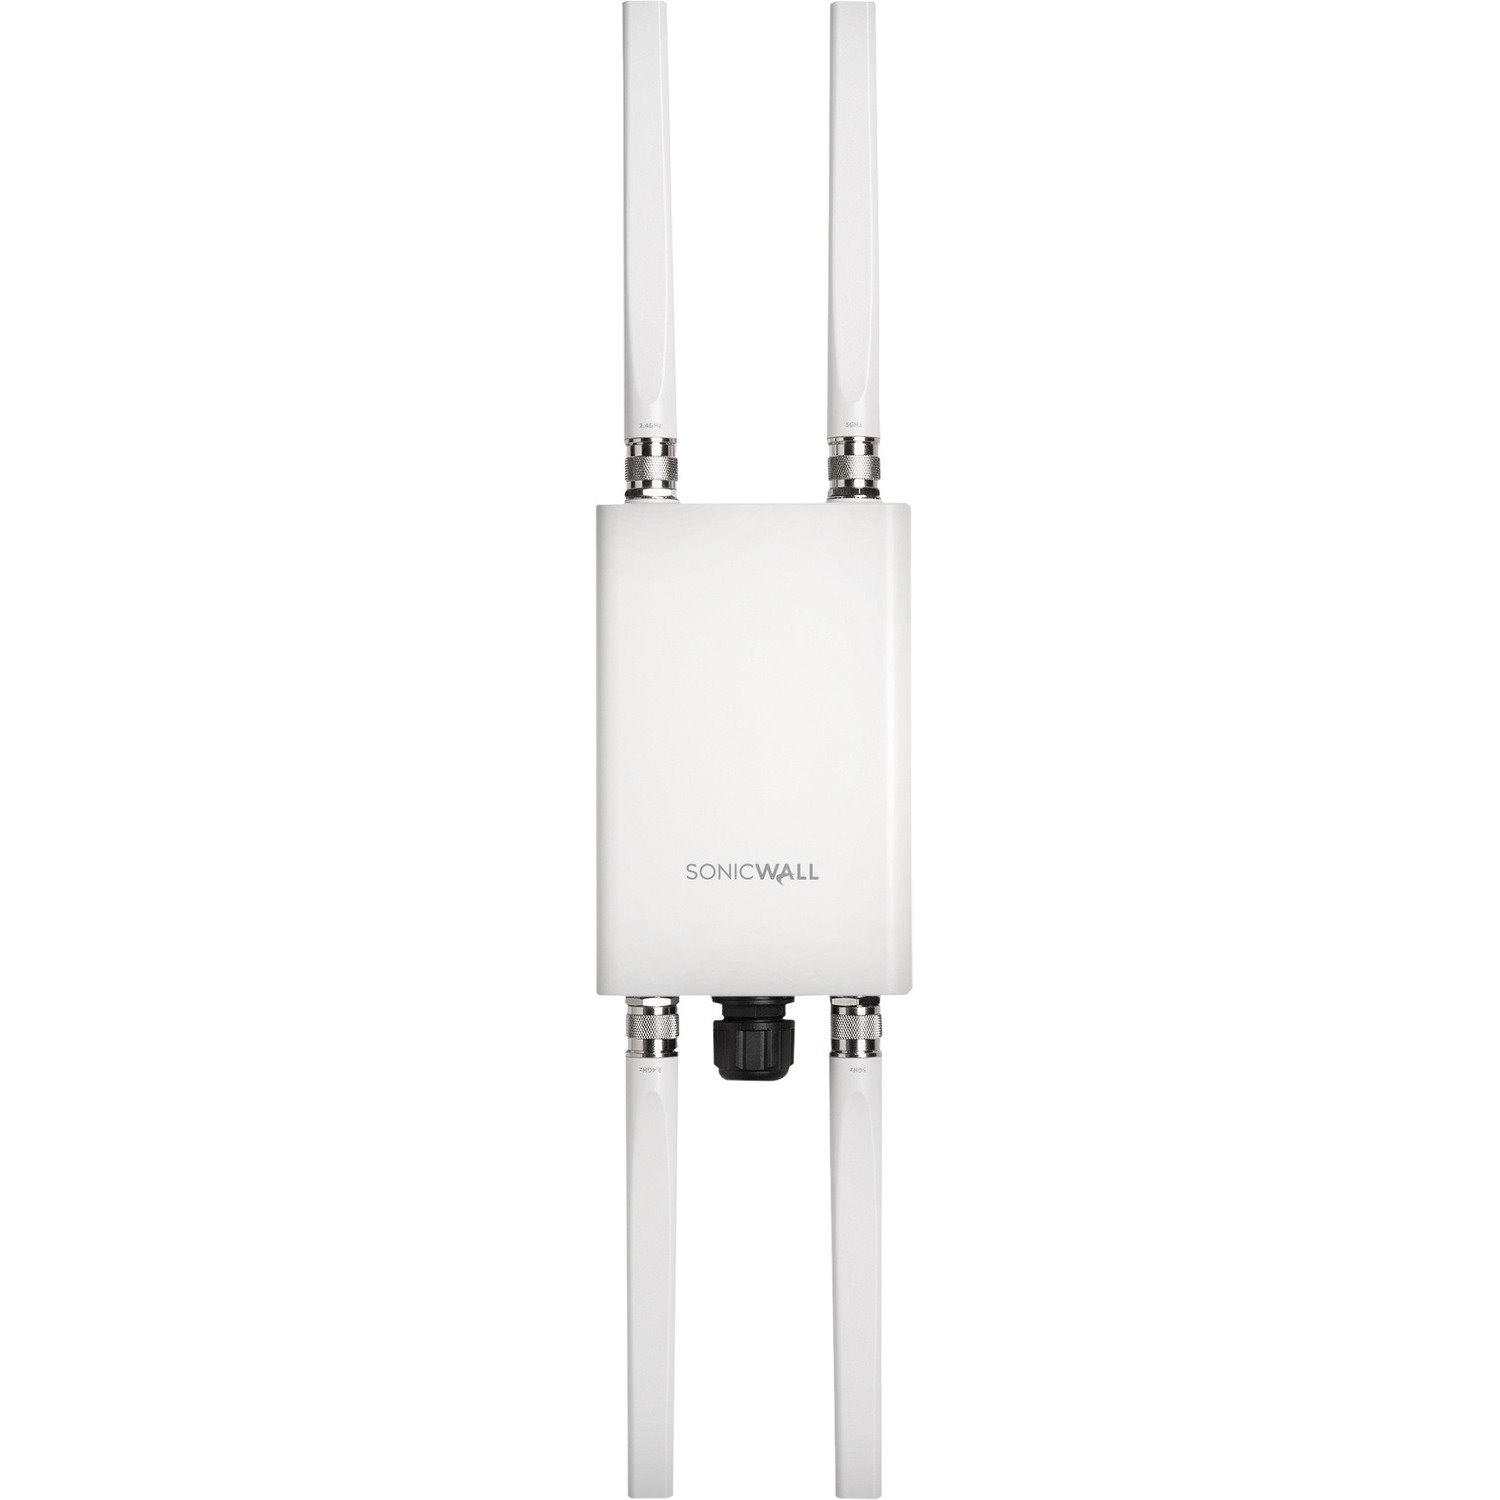 SonicWall Antenna for Wireless Access Point